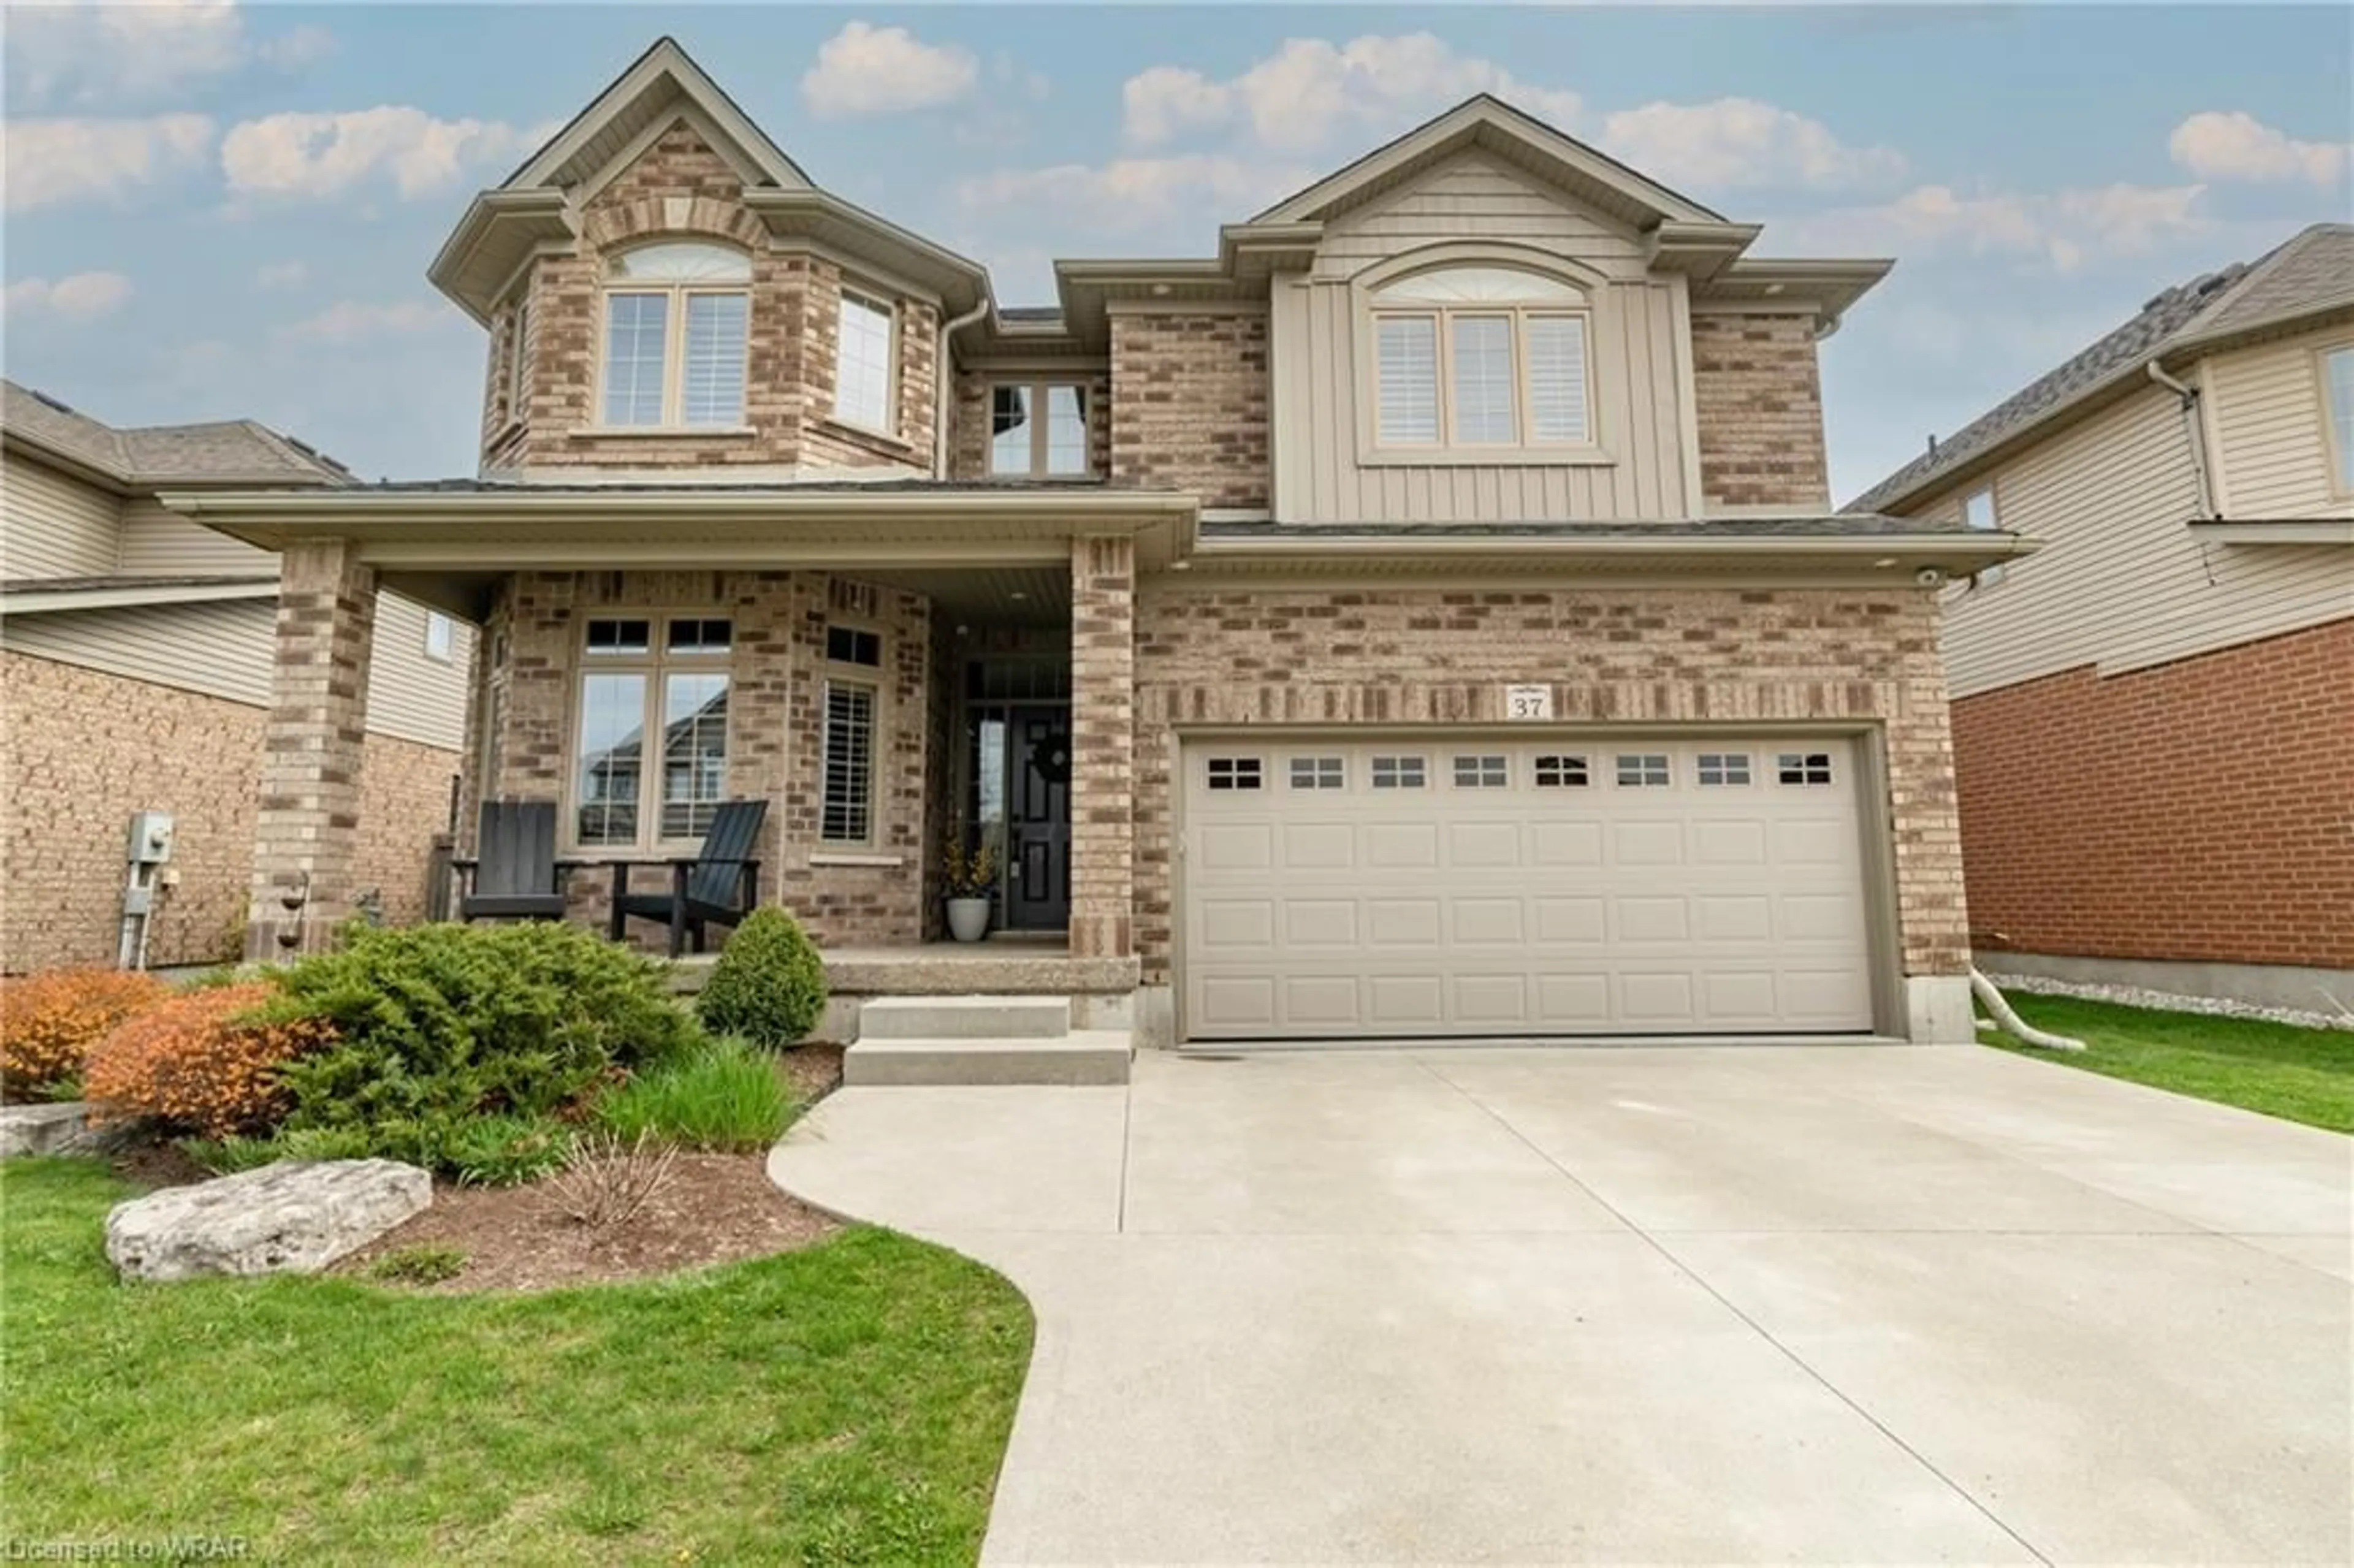 Home with brick exterior material for 37 Goldschmidt Cres, Baden Ontario N3A 4R5